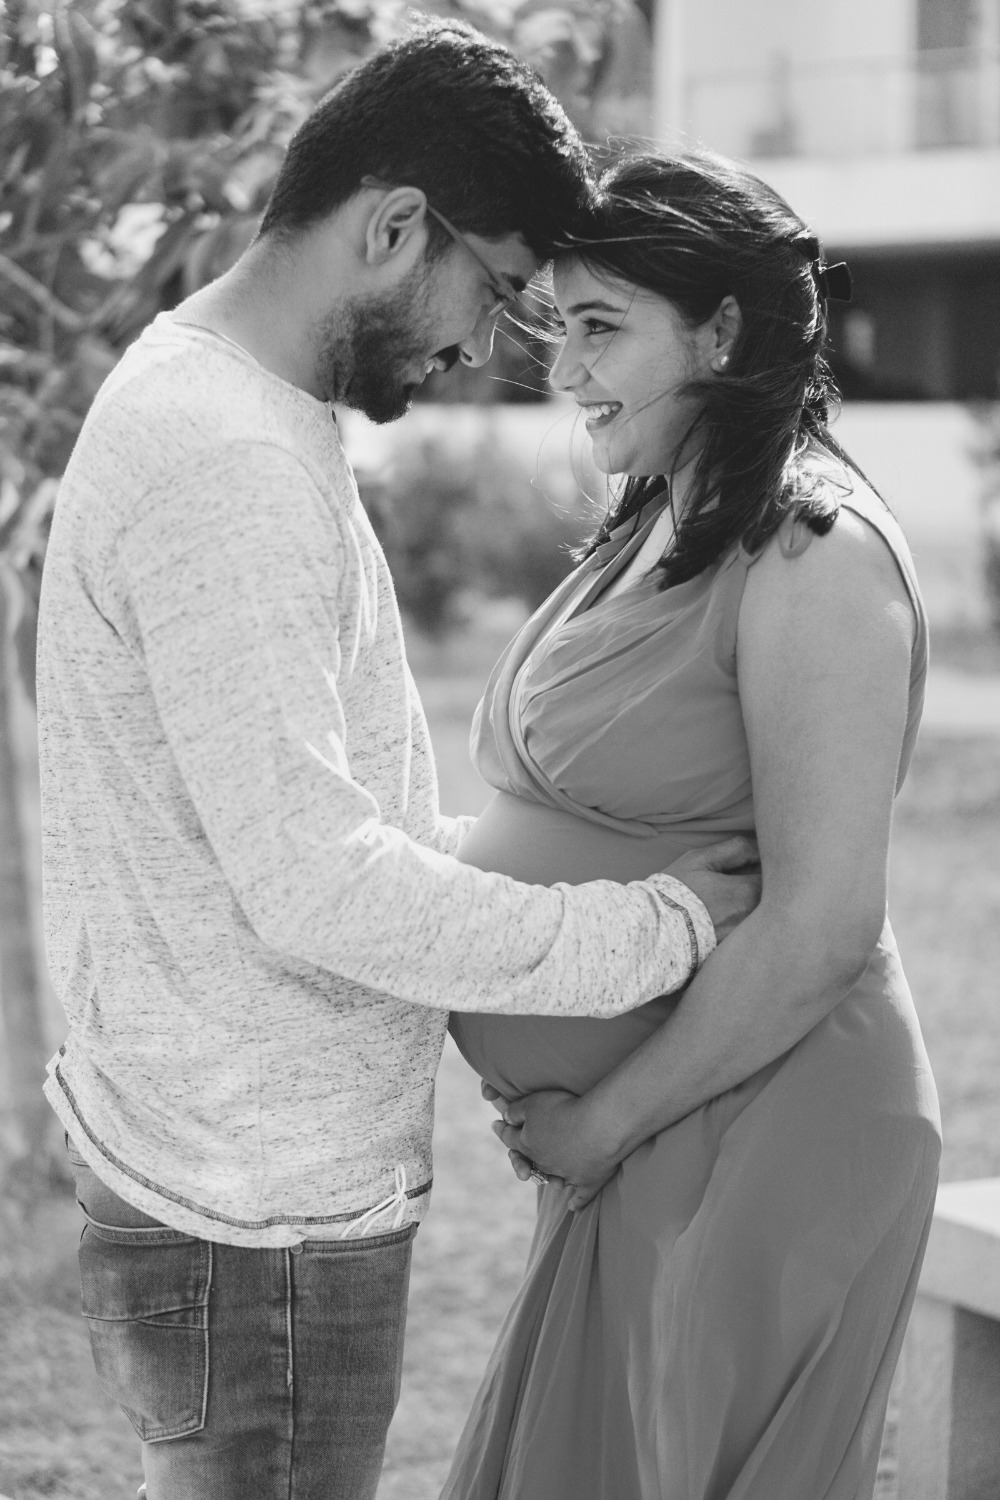 6 Things To Know About A Maternity Session - Hudzen Photography